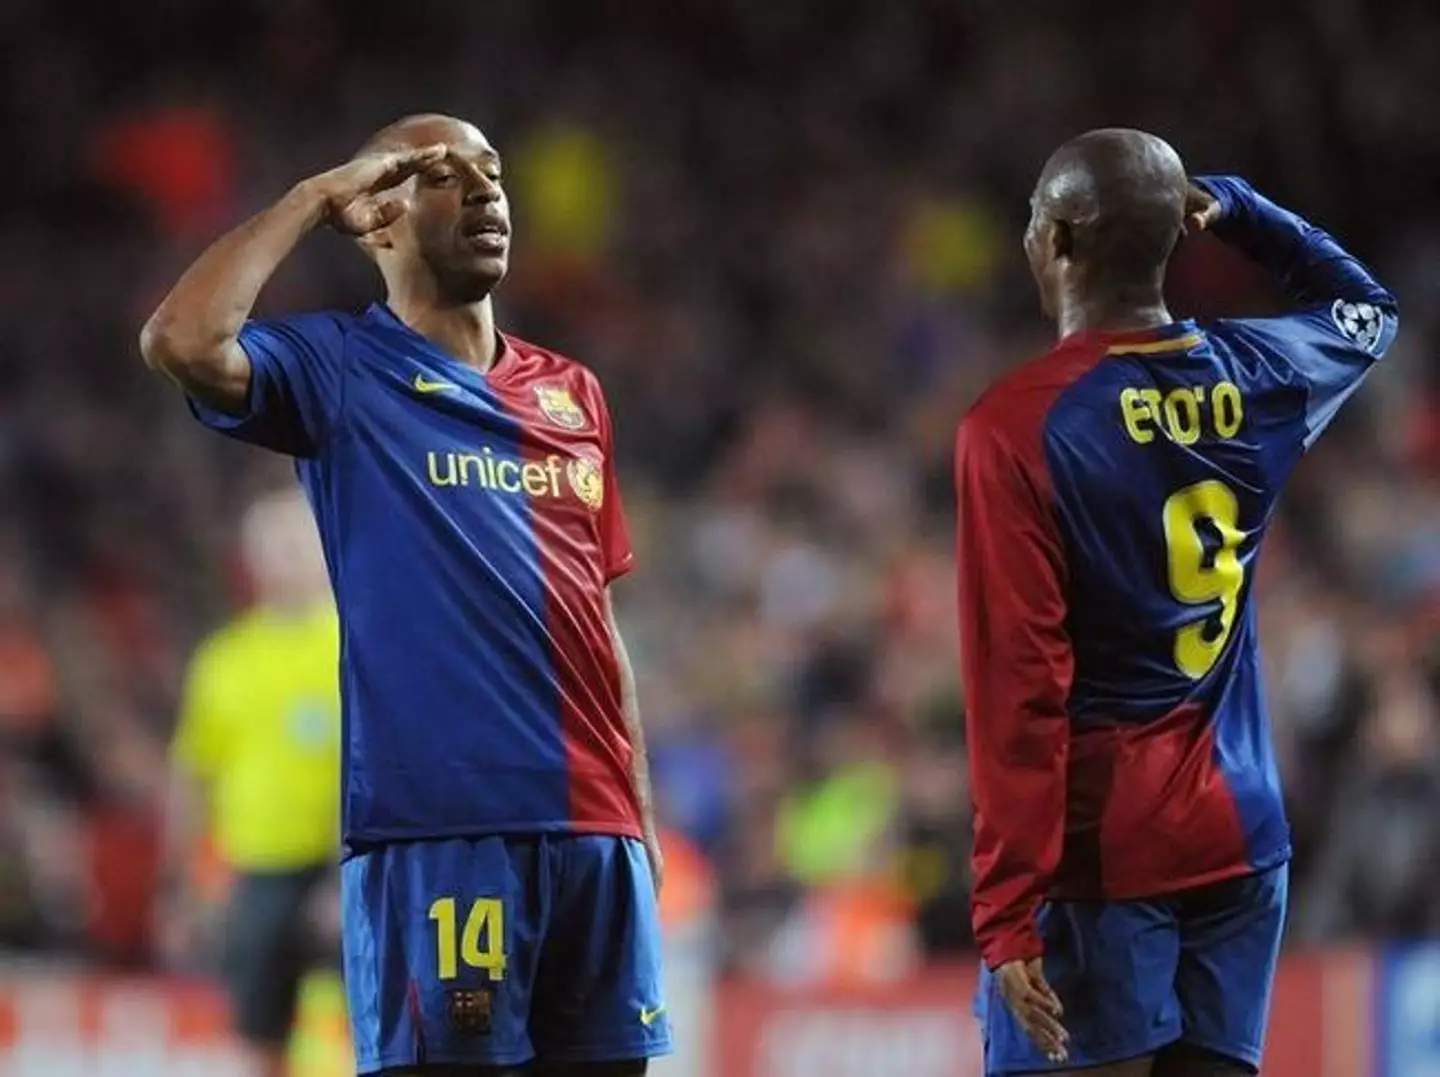 Henry and Eto'o played together at Barcelona (Image: Alamy)